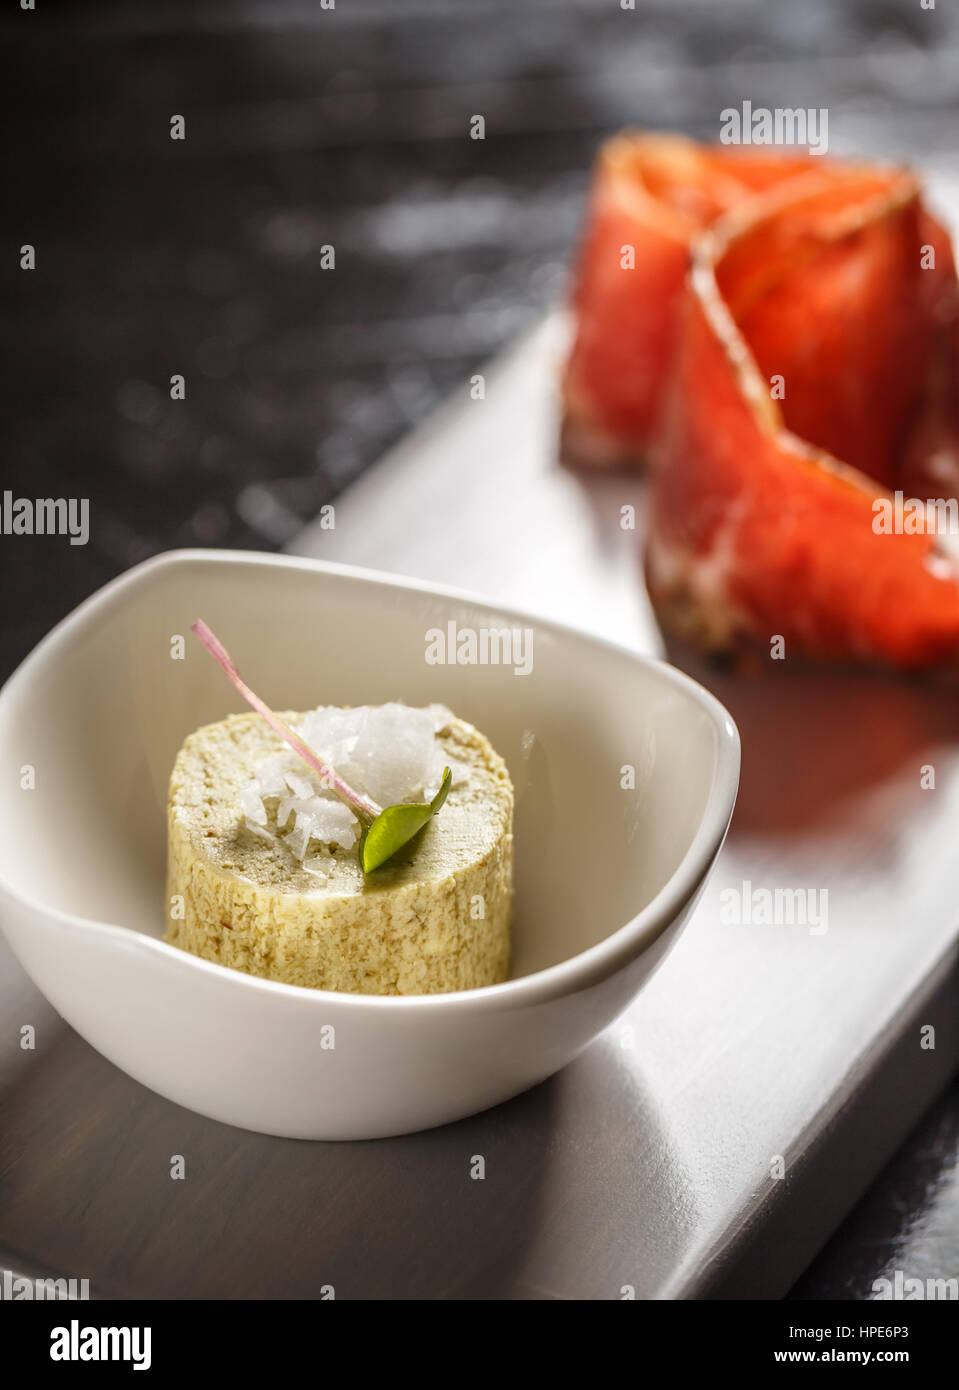 Compound butter with prosciutto served on restaurant table Stock Photo